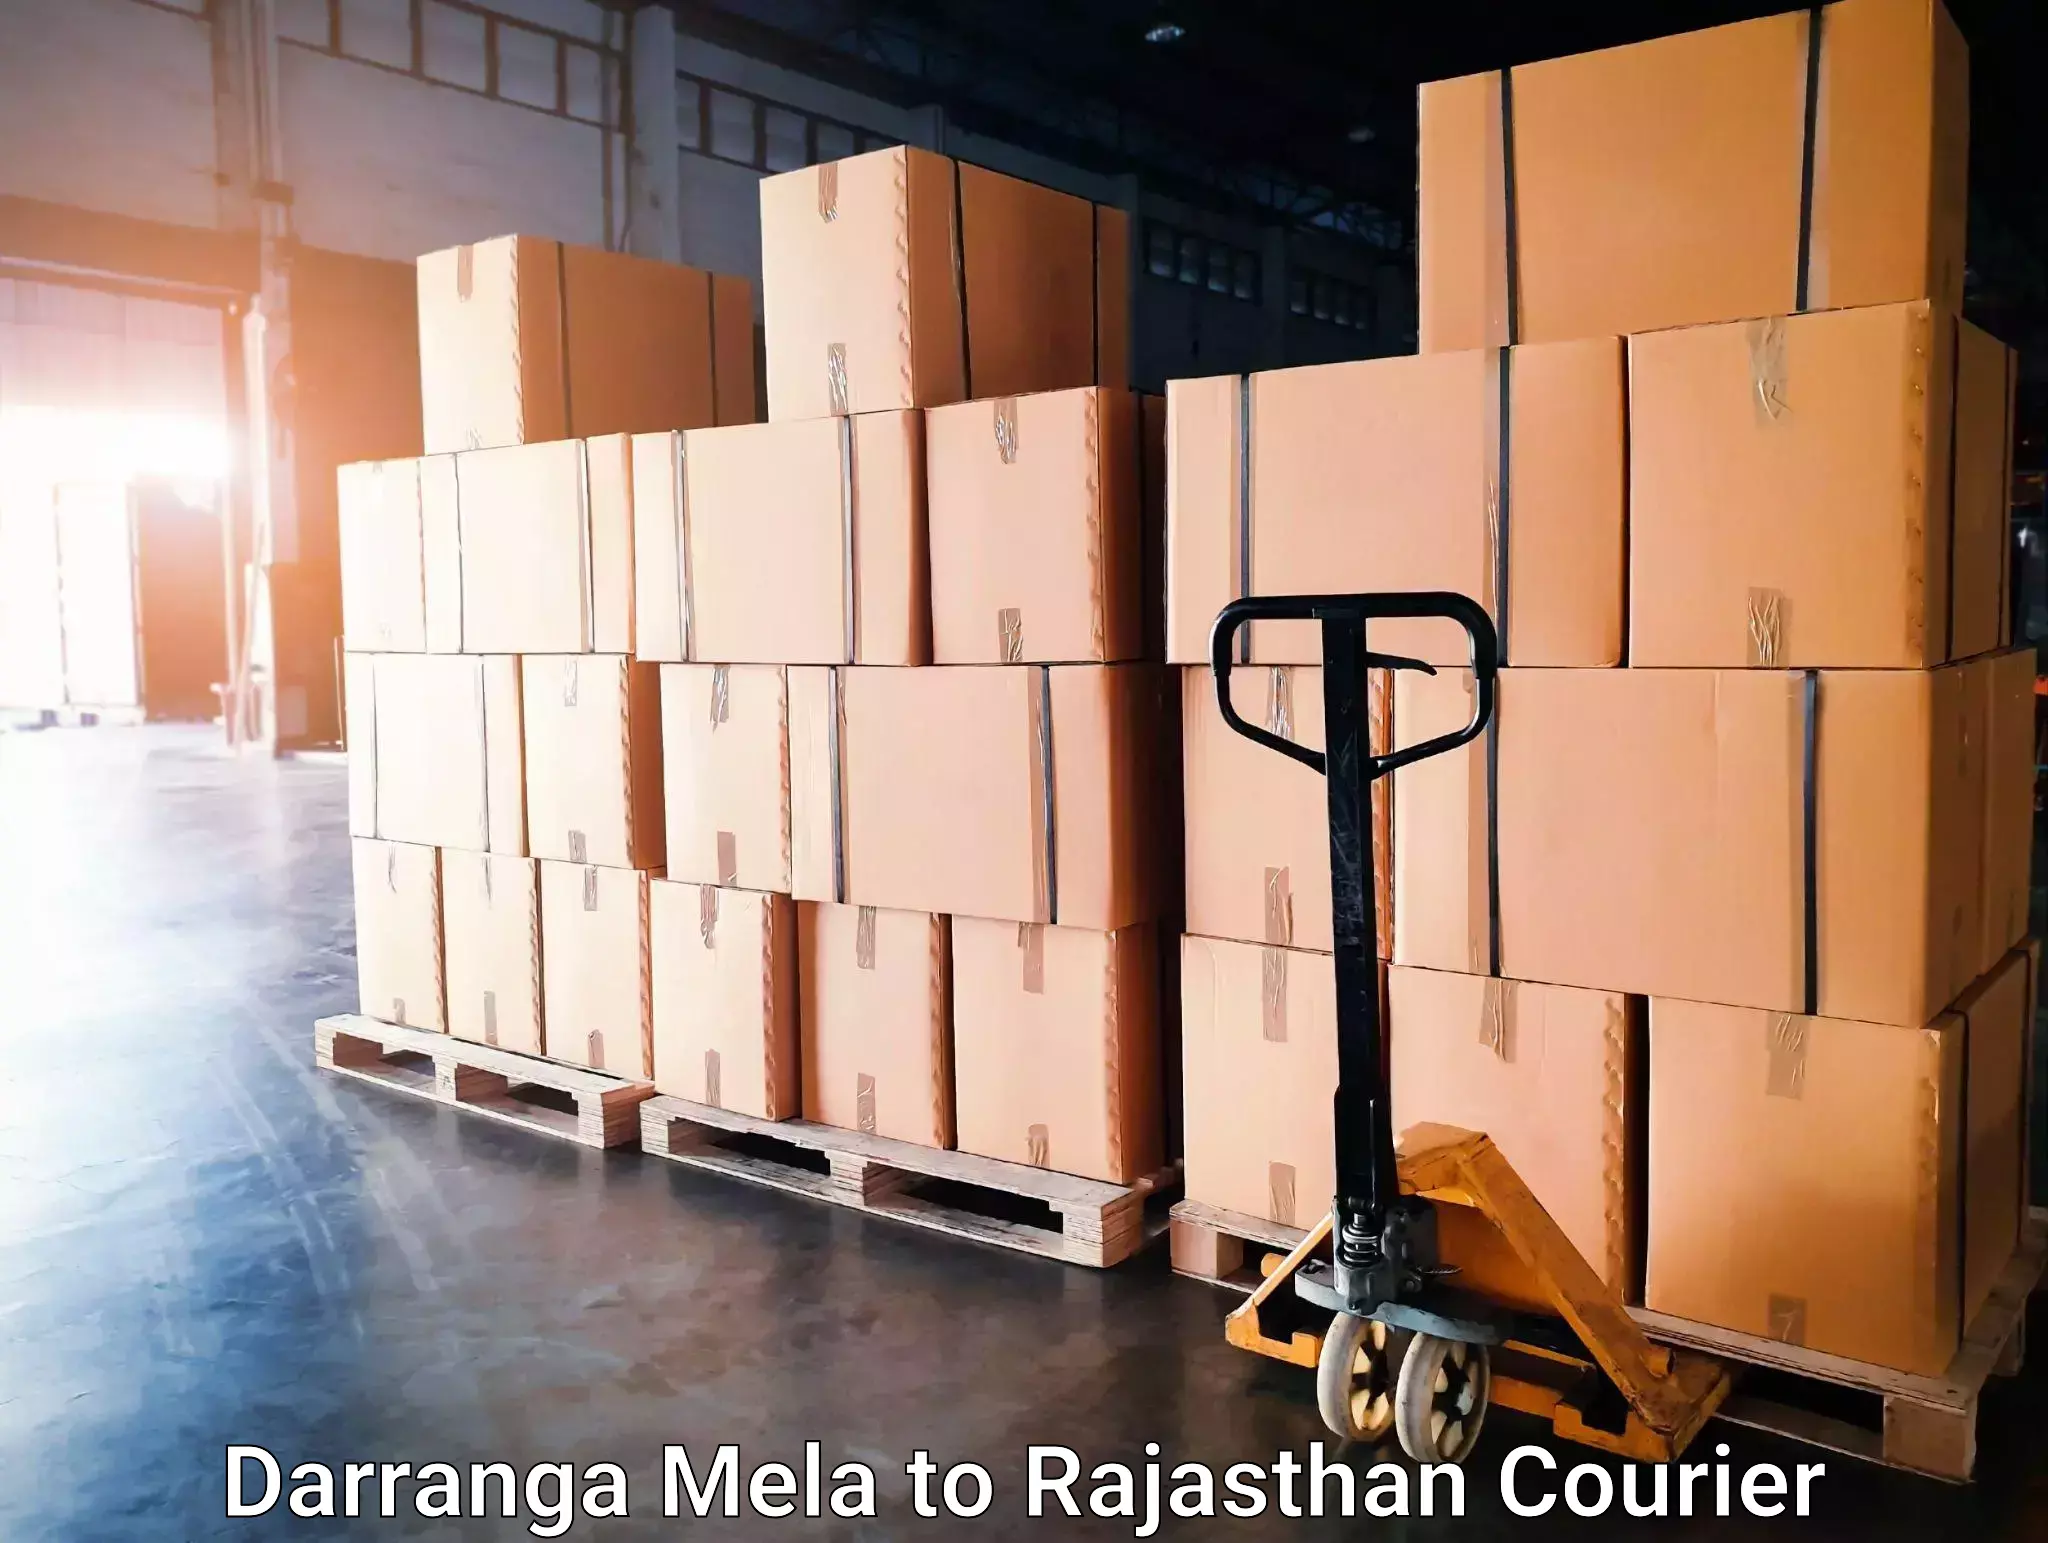 On-call courier service in Darranga Mela to Rajasthan